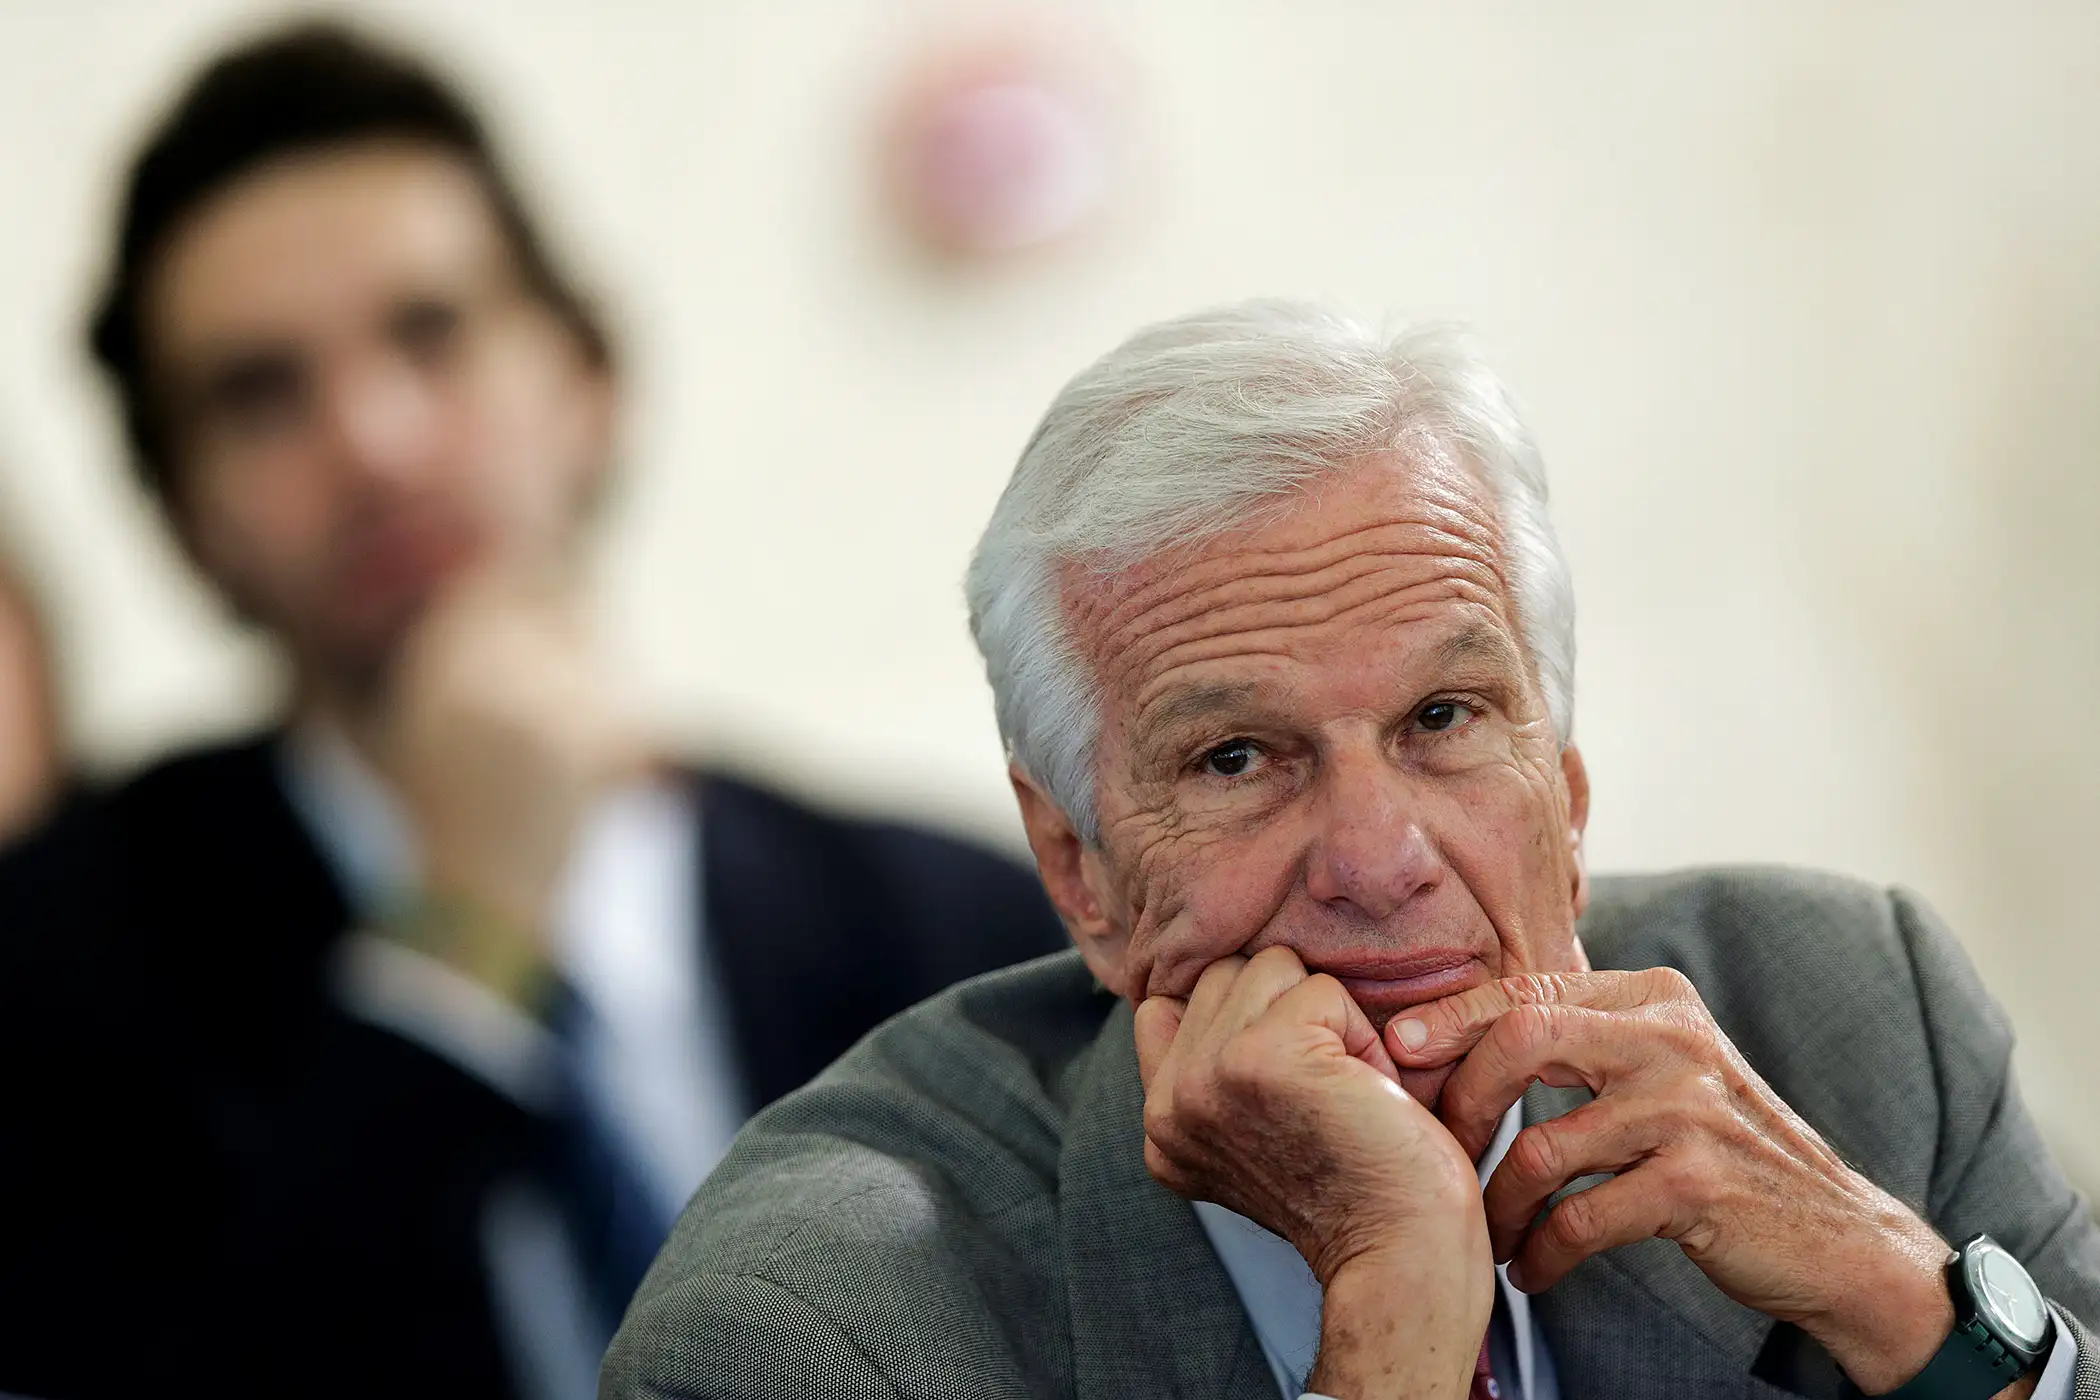 Jorge Paulo Lemann, co-founder and board member of 3G Capital, a global investment firm, looks on during a meeting of the Council for Economic and Social Development (CDES) at the Planalto Palace in Brasilia